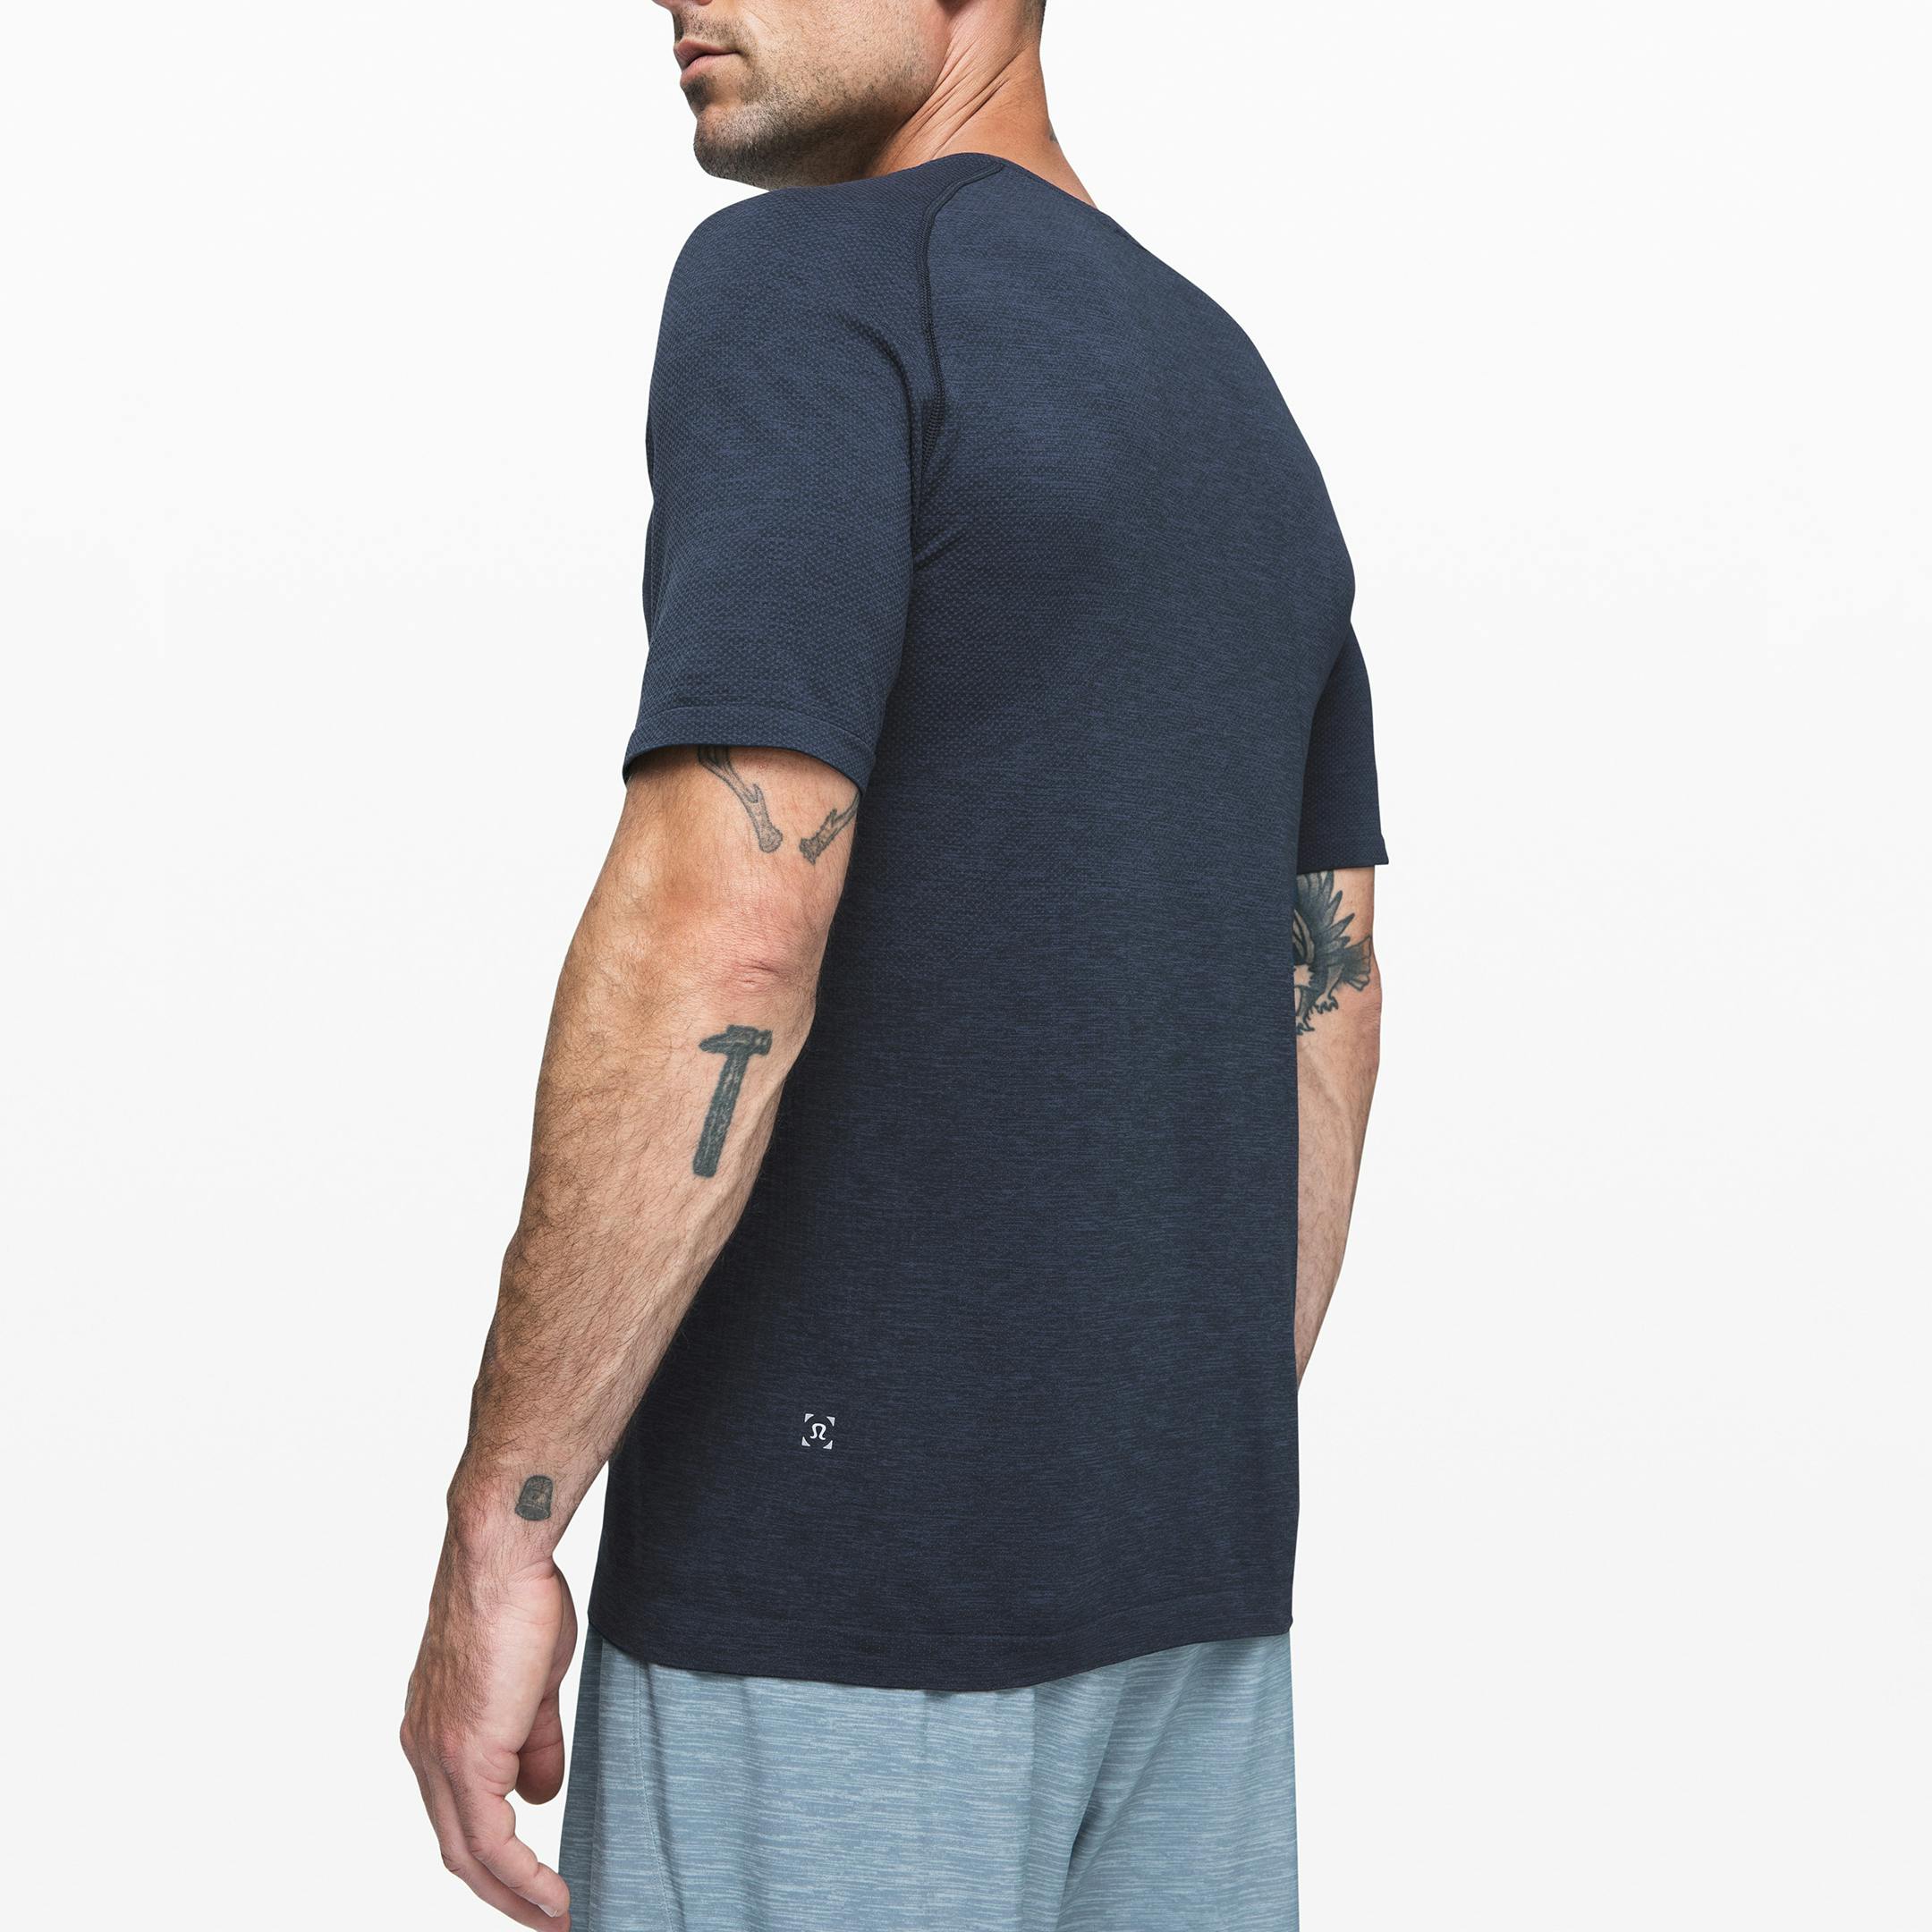 LULULEMON X BARRY'S BLUE VENTILATED OPEN-BACK TEE - 12 / MINERAL